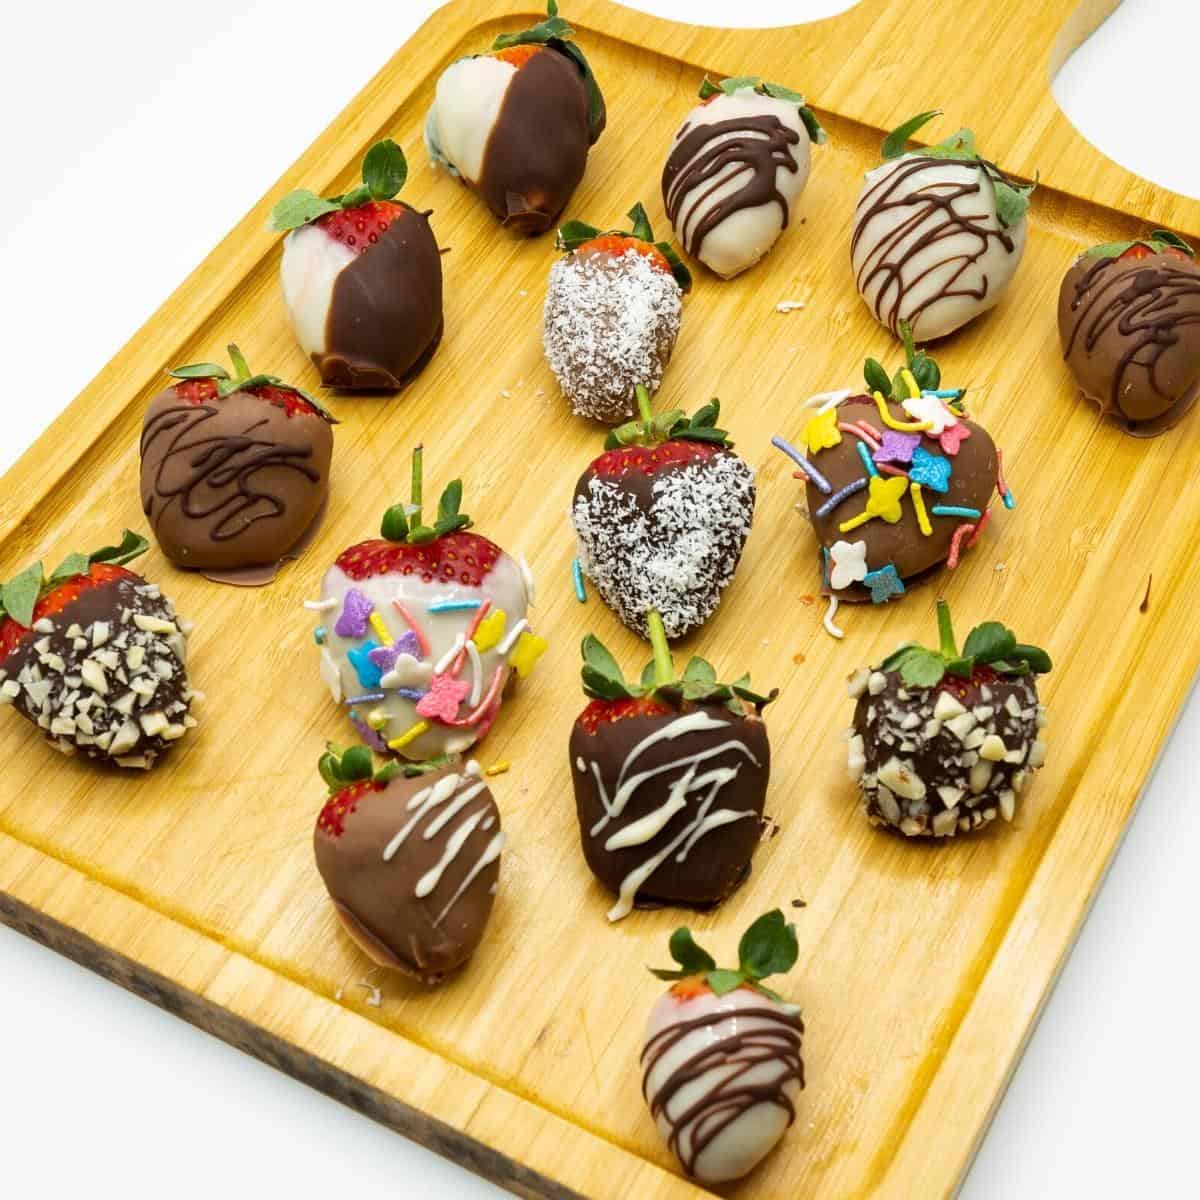 A board with chocolate coated strawberries.